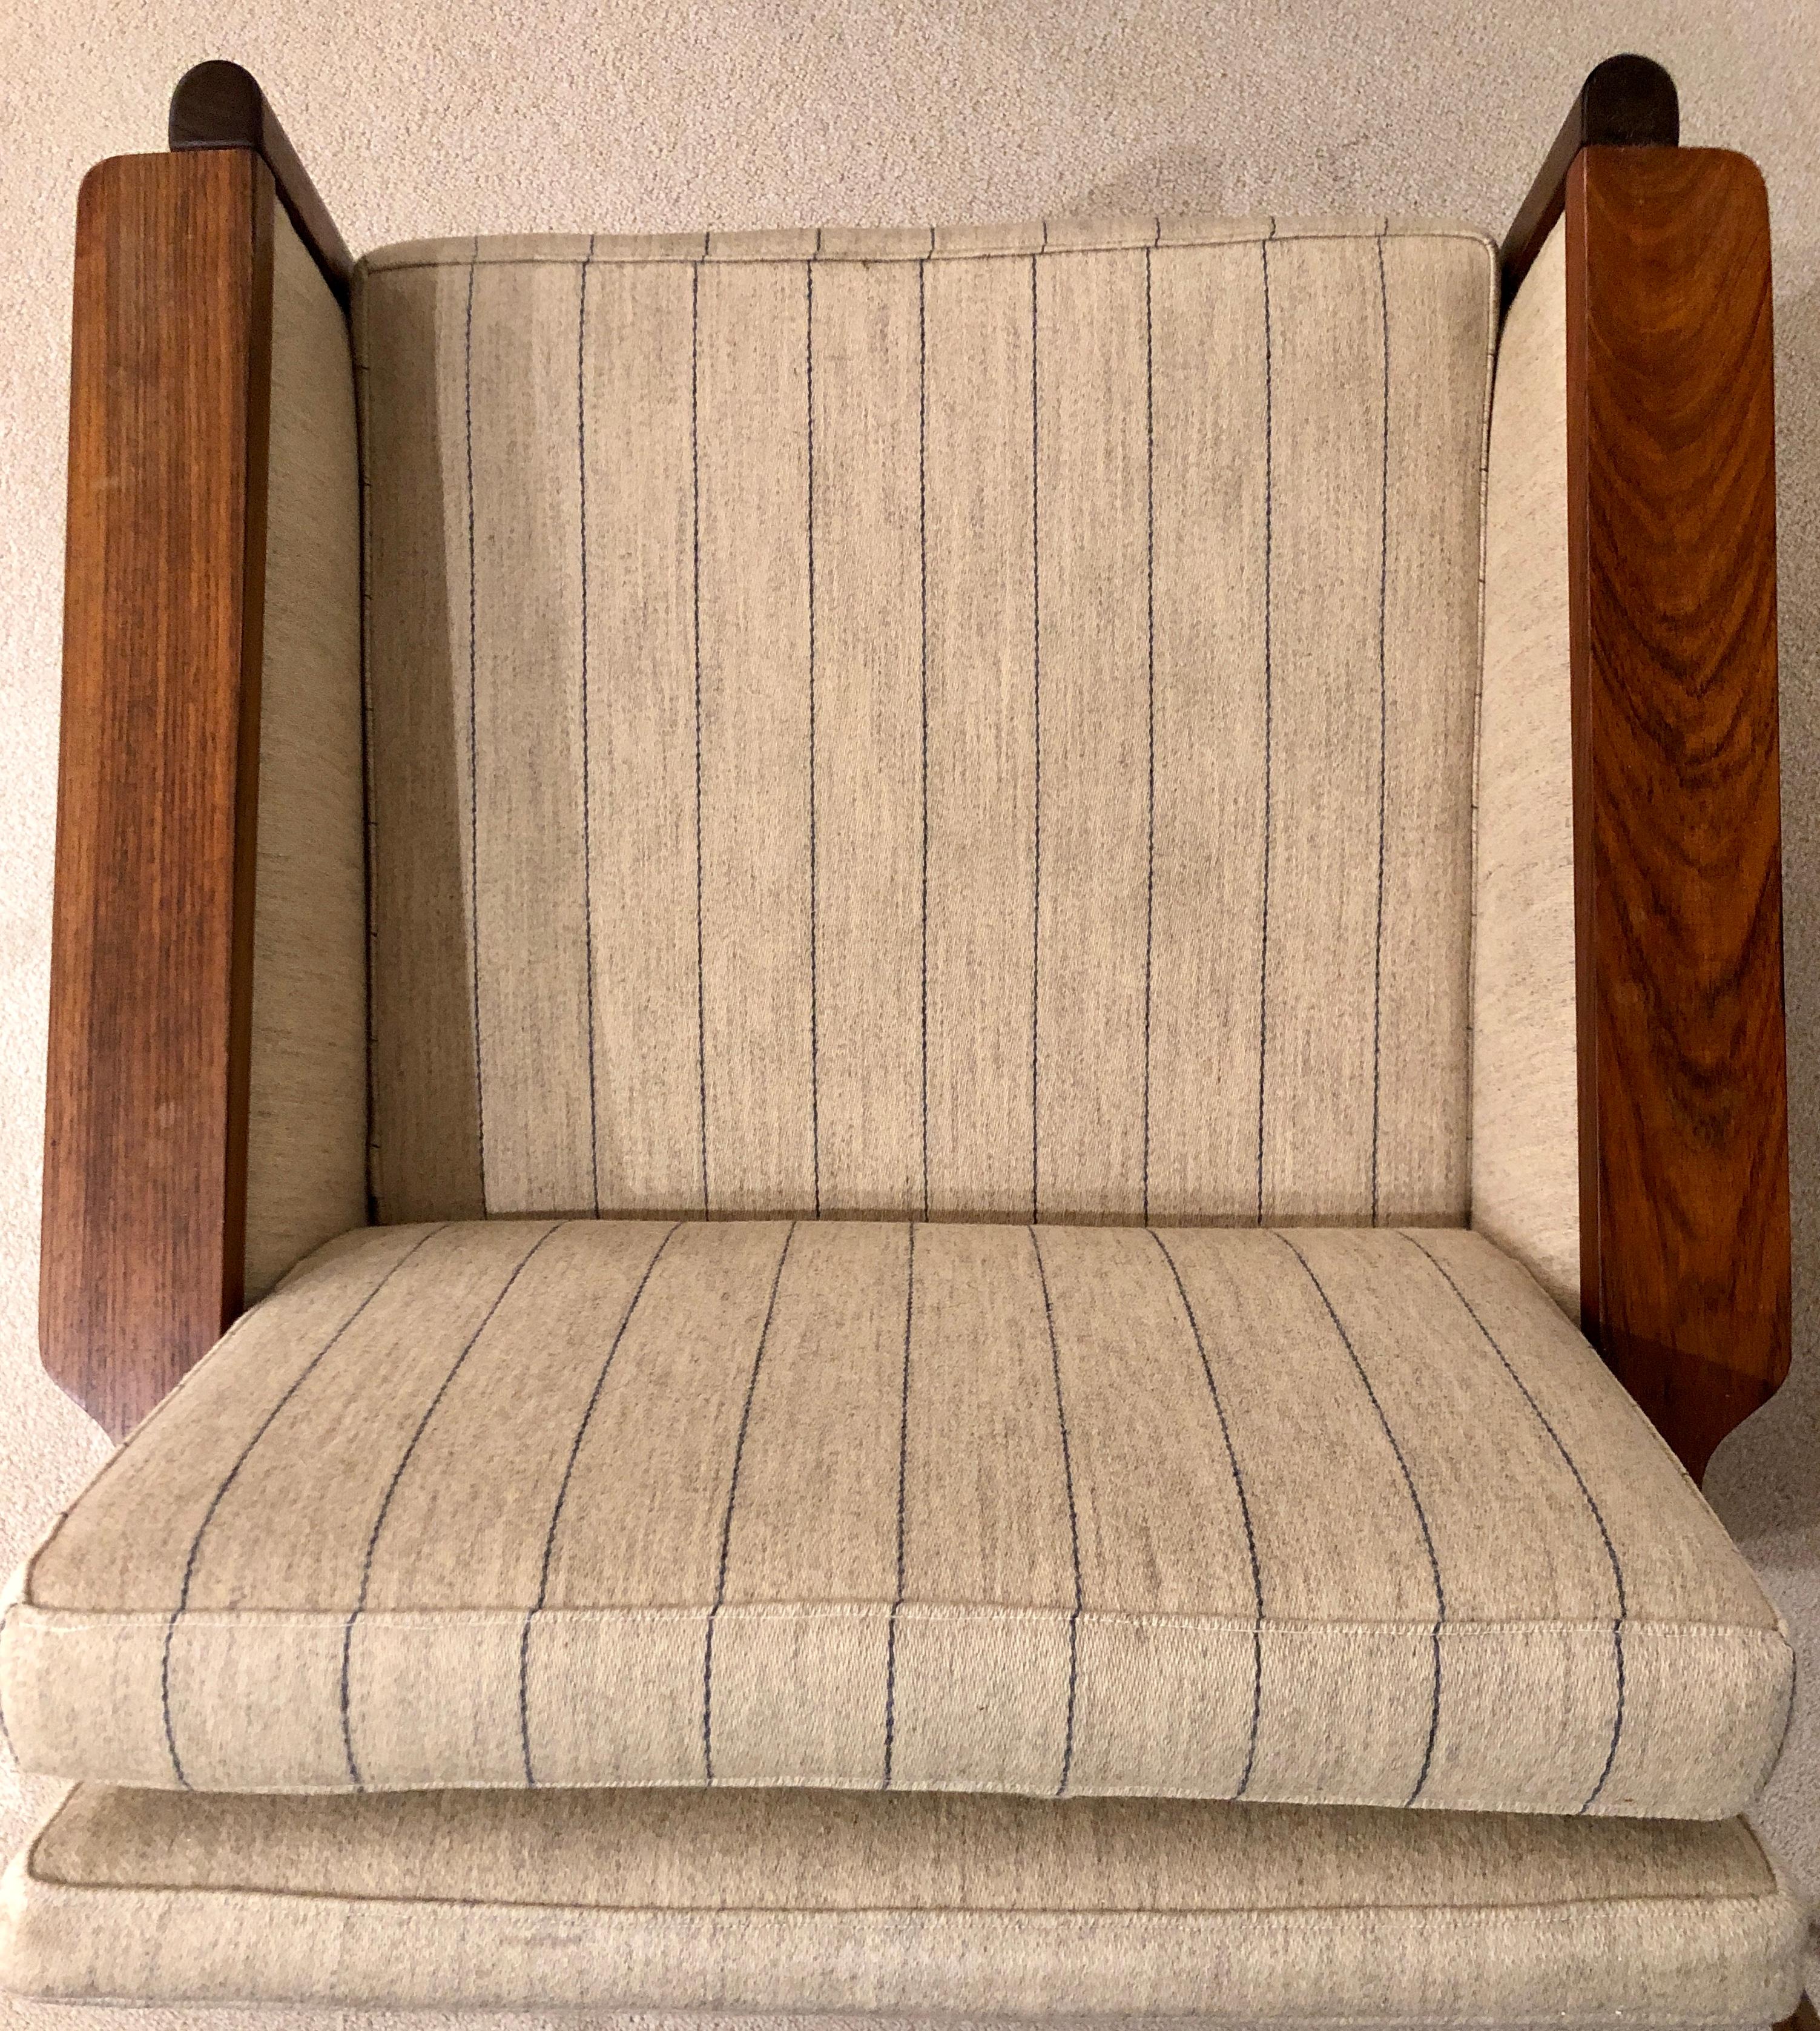 Rosewood Sven Ivar Dysthe Reupholstered 3-Seat Sofa & a Lounge Chair, 1950s For Sale 4